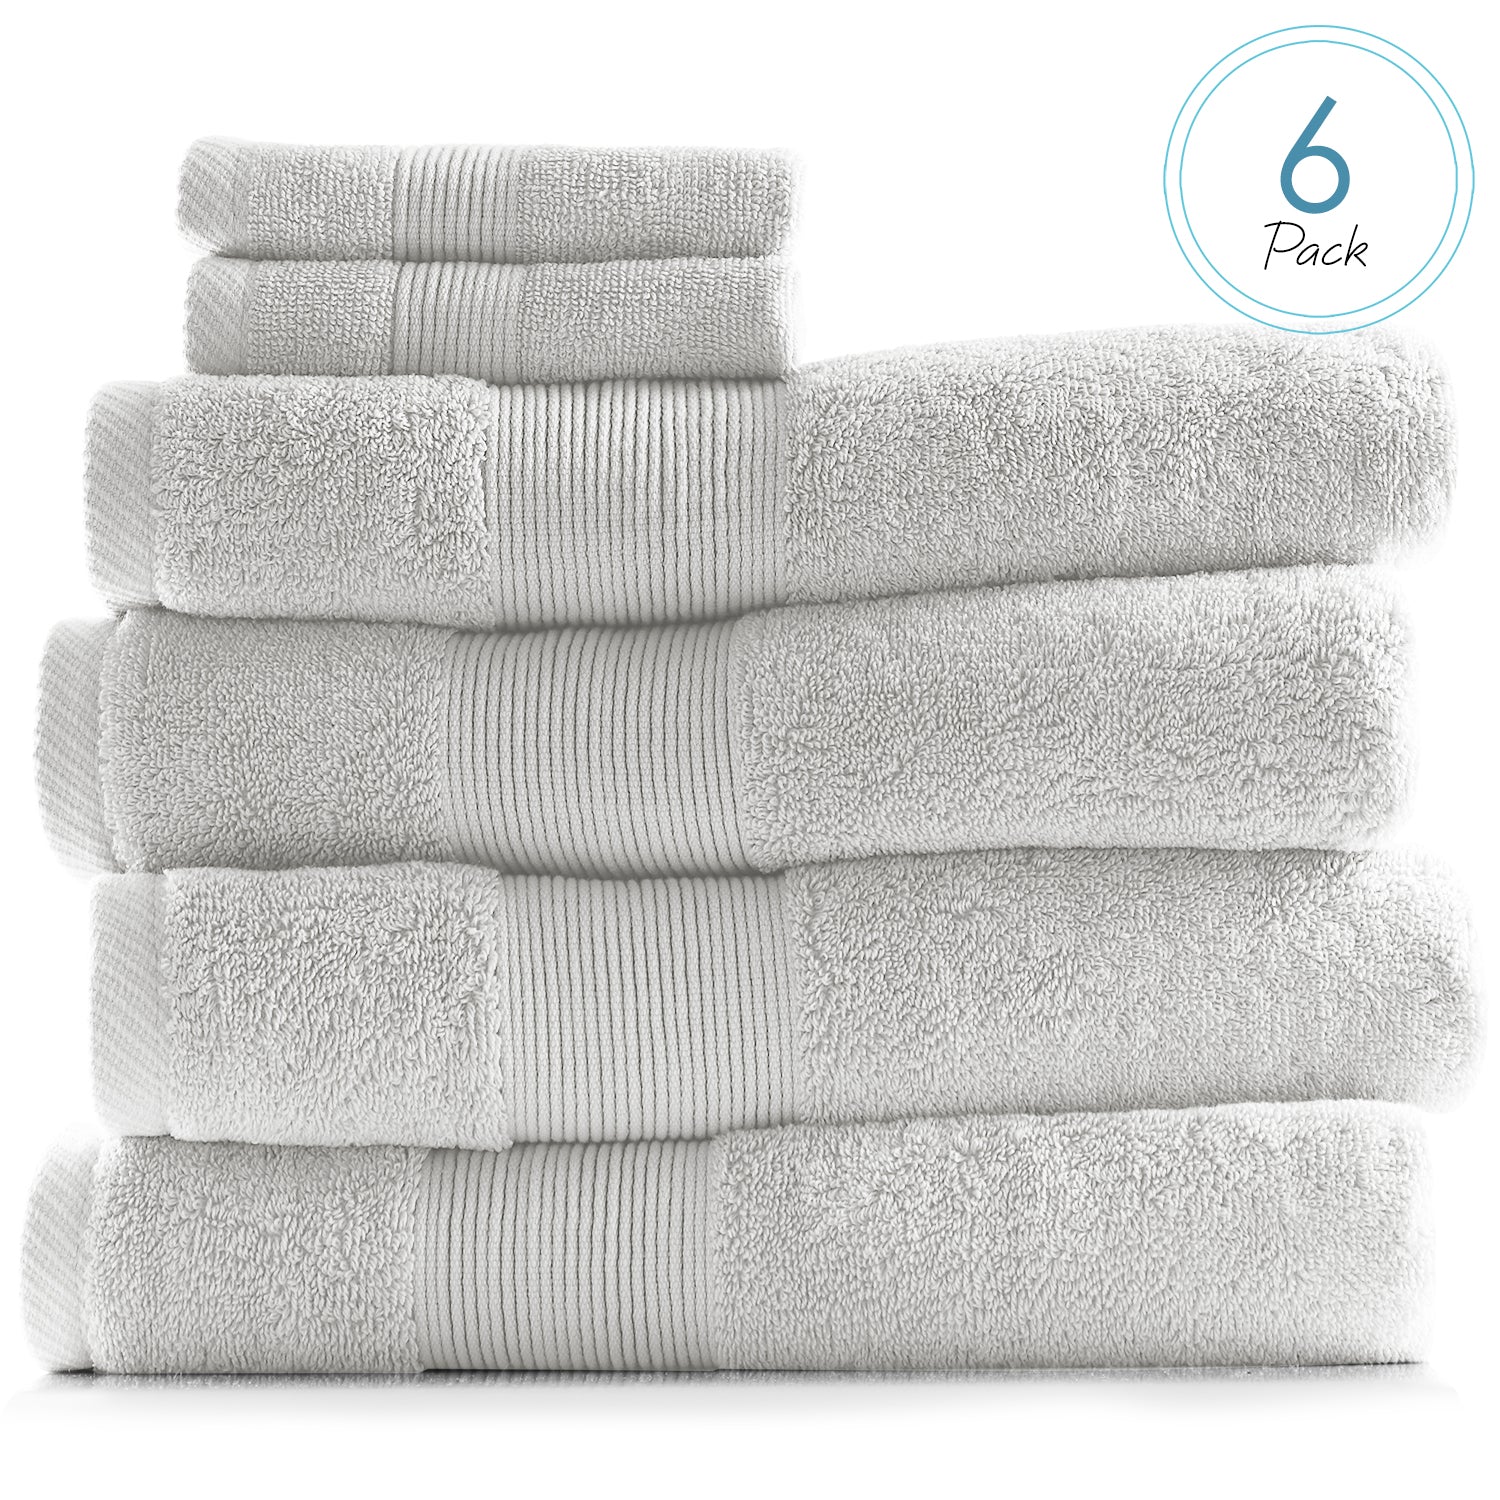 LUXURY EGYPTIAN COTTON TOWEL MIAMI HAND TOWELS BATH SHEET ABSORBENT SOFT  700 GSM